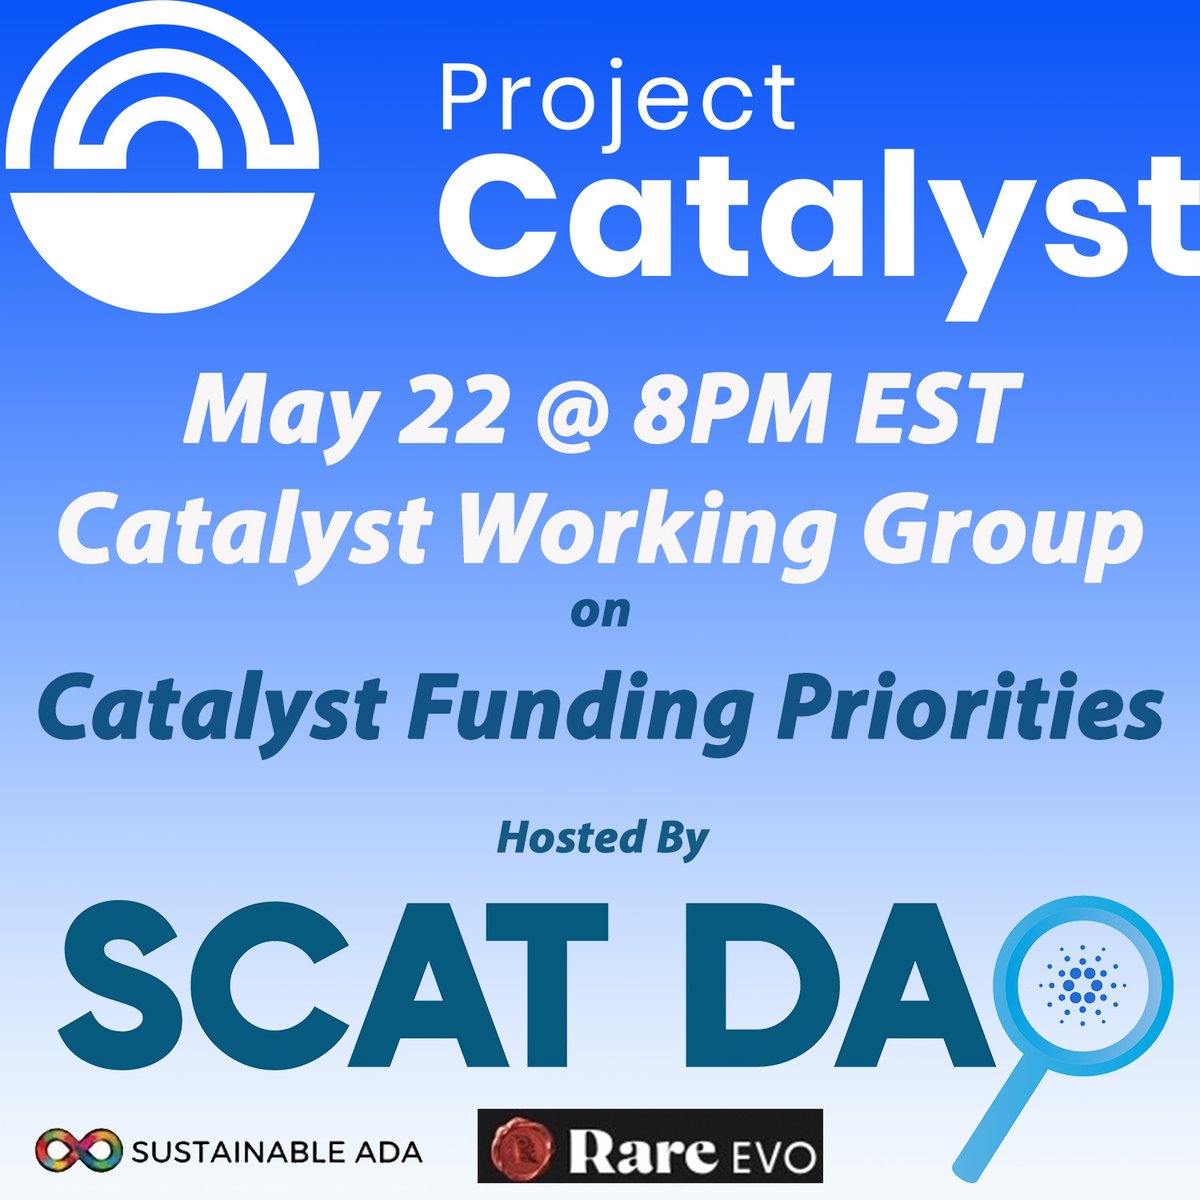 Hey #Cardano, have you been seeing all those awesome Catalyst Working Group posts and are disappointed you are missing out? Well we are hosting on online one and you are invited 🎉 Register Here: lu.ma/q69deuq8 #ProjectCatalyst is a huge part of #Cardano. This is an